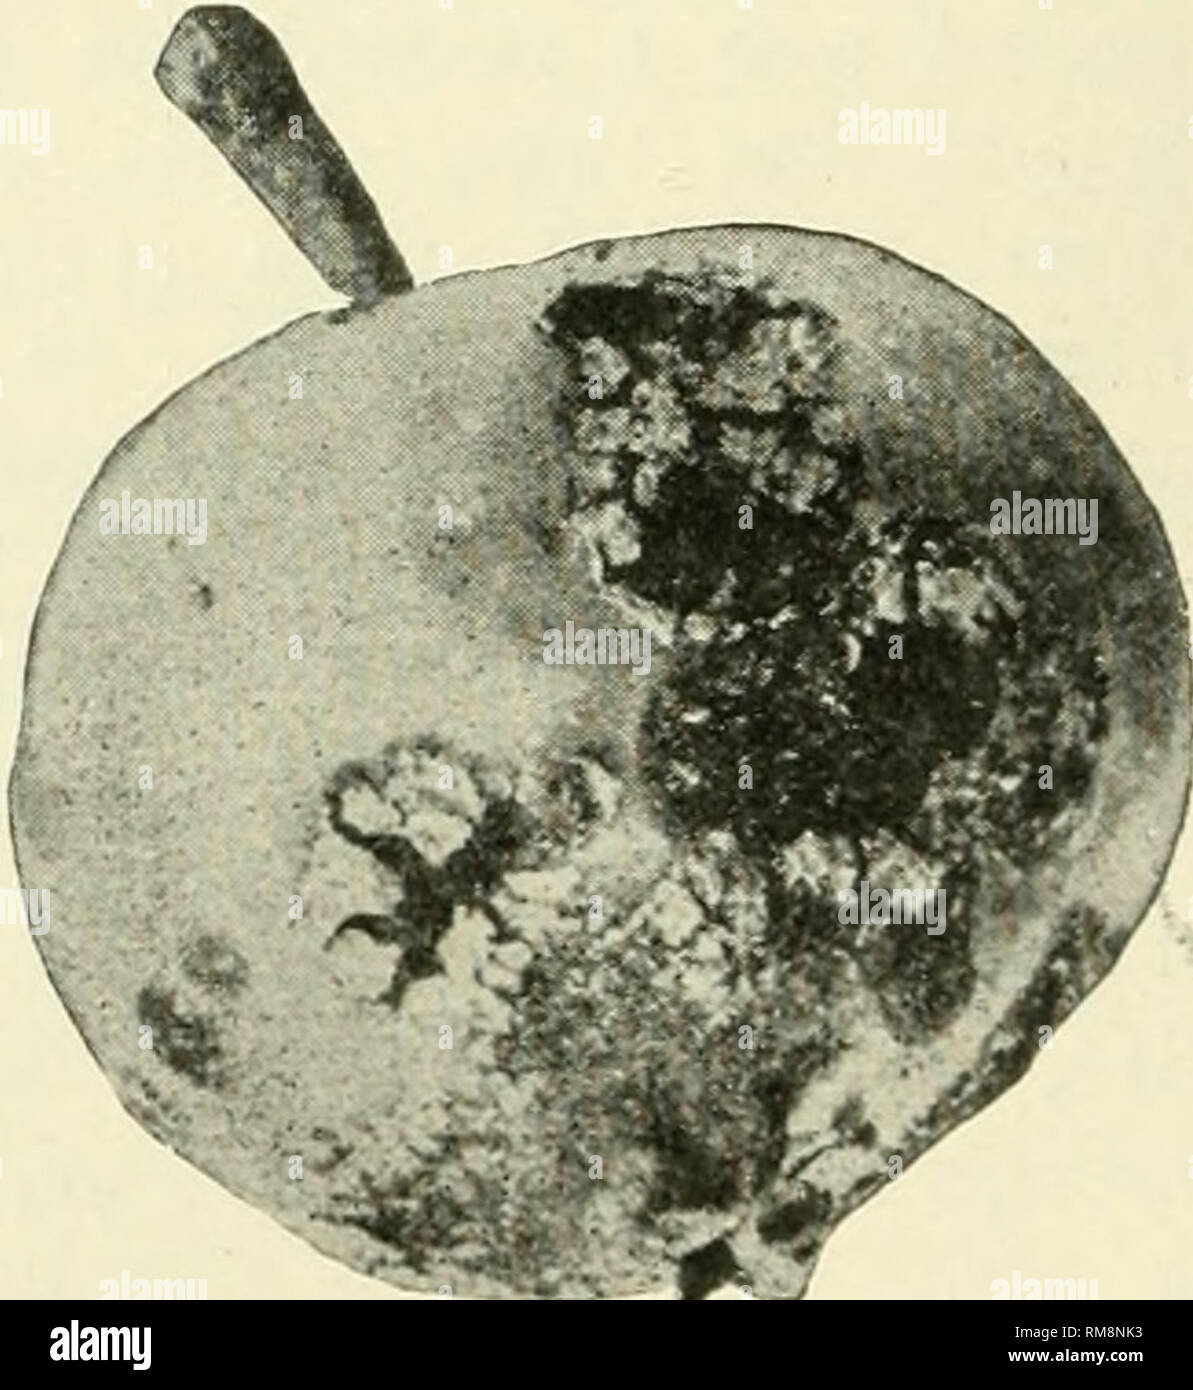 . Annual report of the Cornell University Agricultural Experiment Station, Ithaca, N.Y. Cornell University. Agricultural Experiment Station; Agriculture -- New York (State). Fig. 162. Alfalfa leaf-spot. APPLE. Commonly known among growers as &quot; the fungus.&quot; Usually most evident on the fruit. Spray with Bordeaux 5--5&quot;50 o^ 3-3-50; first, just before the blossoms open; second, just as the blossoms fall; third, 10 to 14 days after the hlossoms fall. The second spraying seems to be the most important. Spray thoroughly. For the use of insect poisons with Bordeaux mixture, see codling- Stock Photo